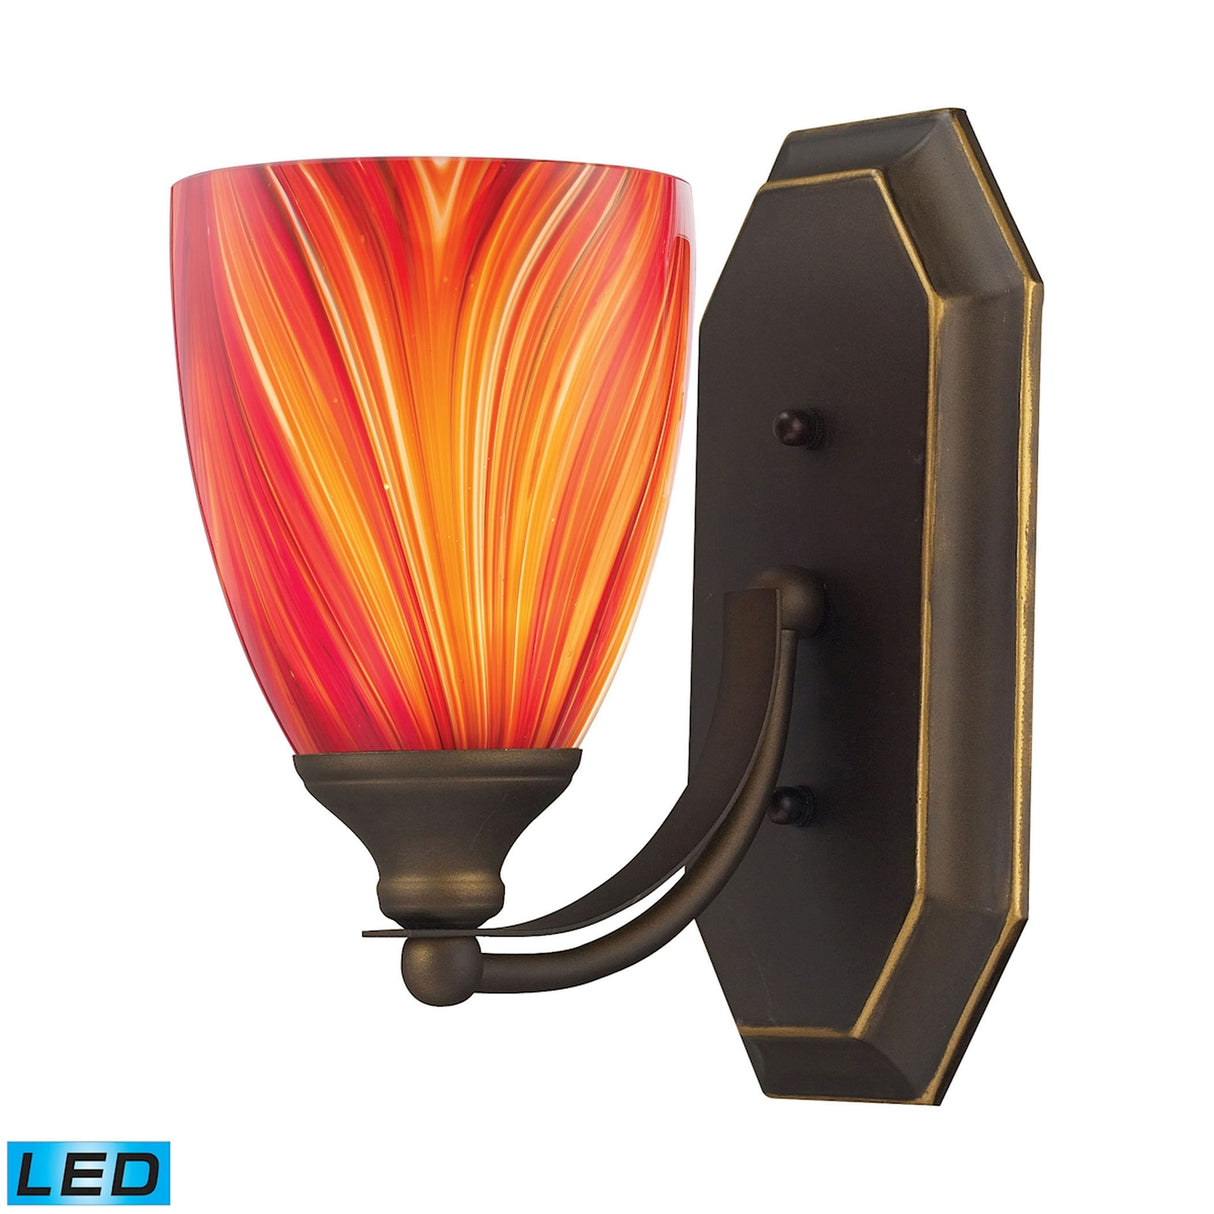 Elk 570-1B-M-LED Mix-N-Match Vanity 1-Light Wall Lamp in Aged Bronze with Multi-colored Glass - Includes LED Bulb